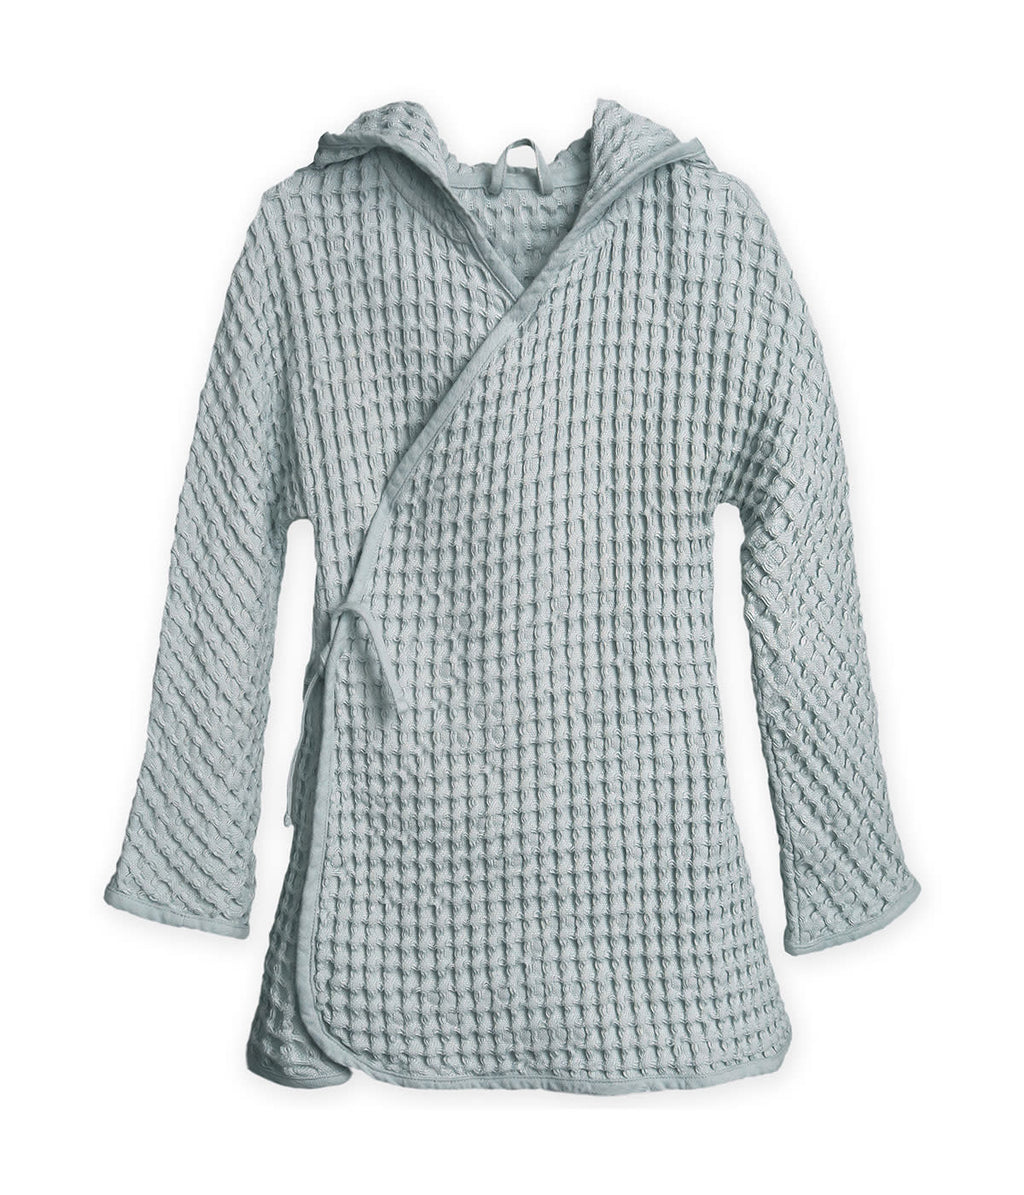 big waffle junior bathrobe in multiple colors design by the organic company 2